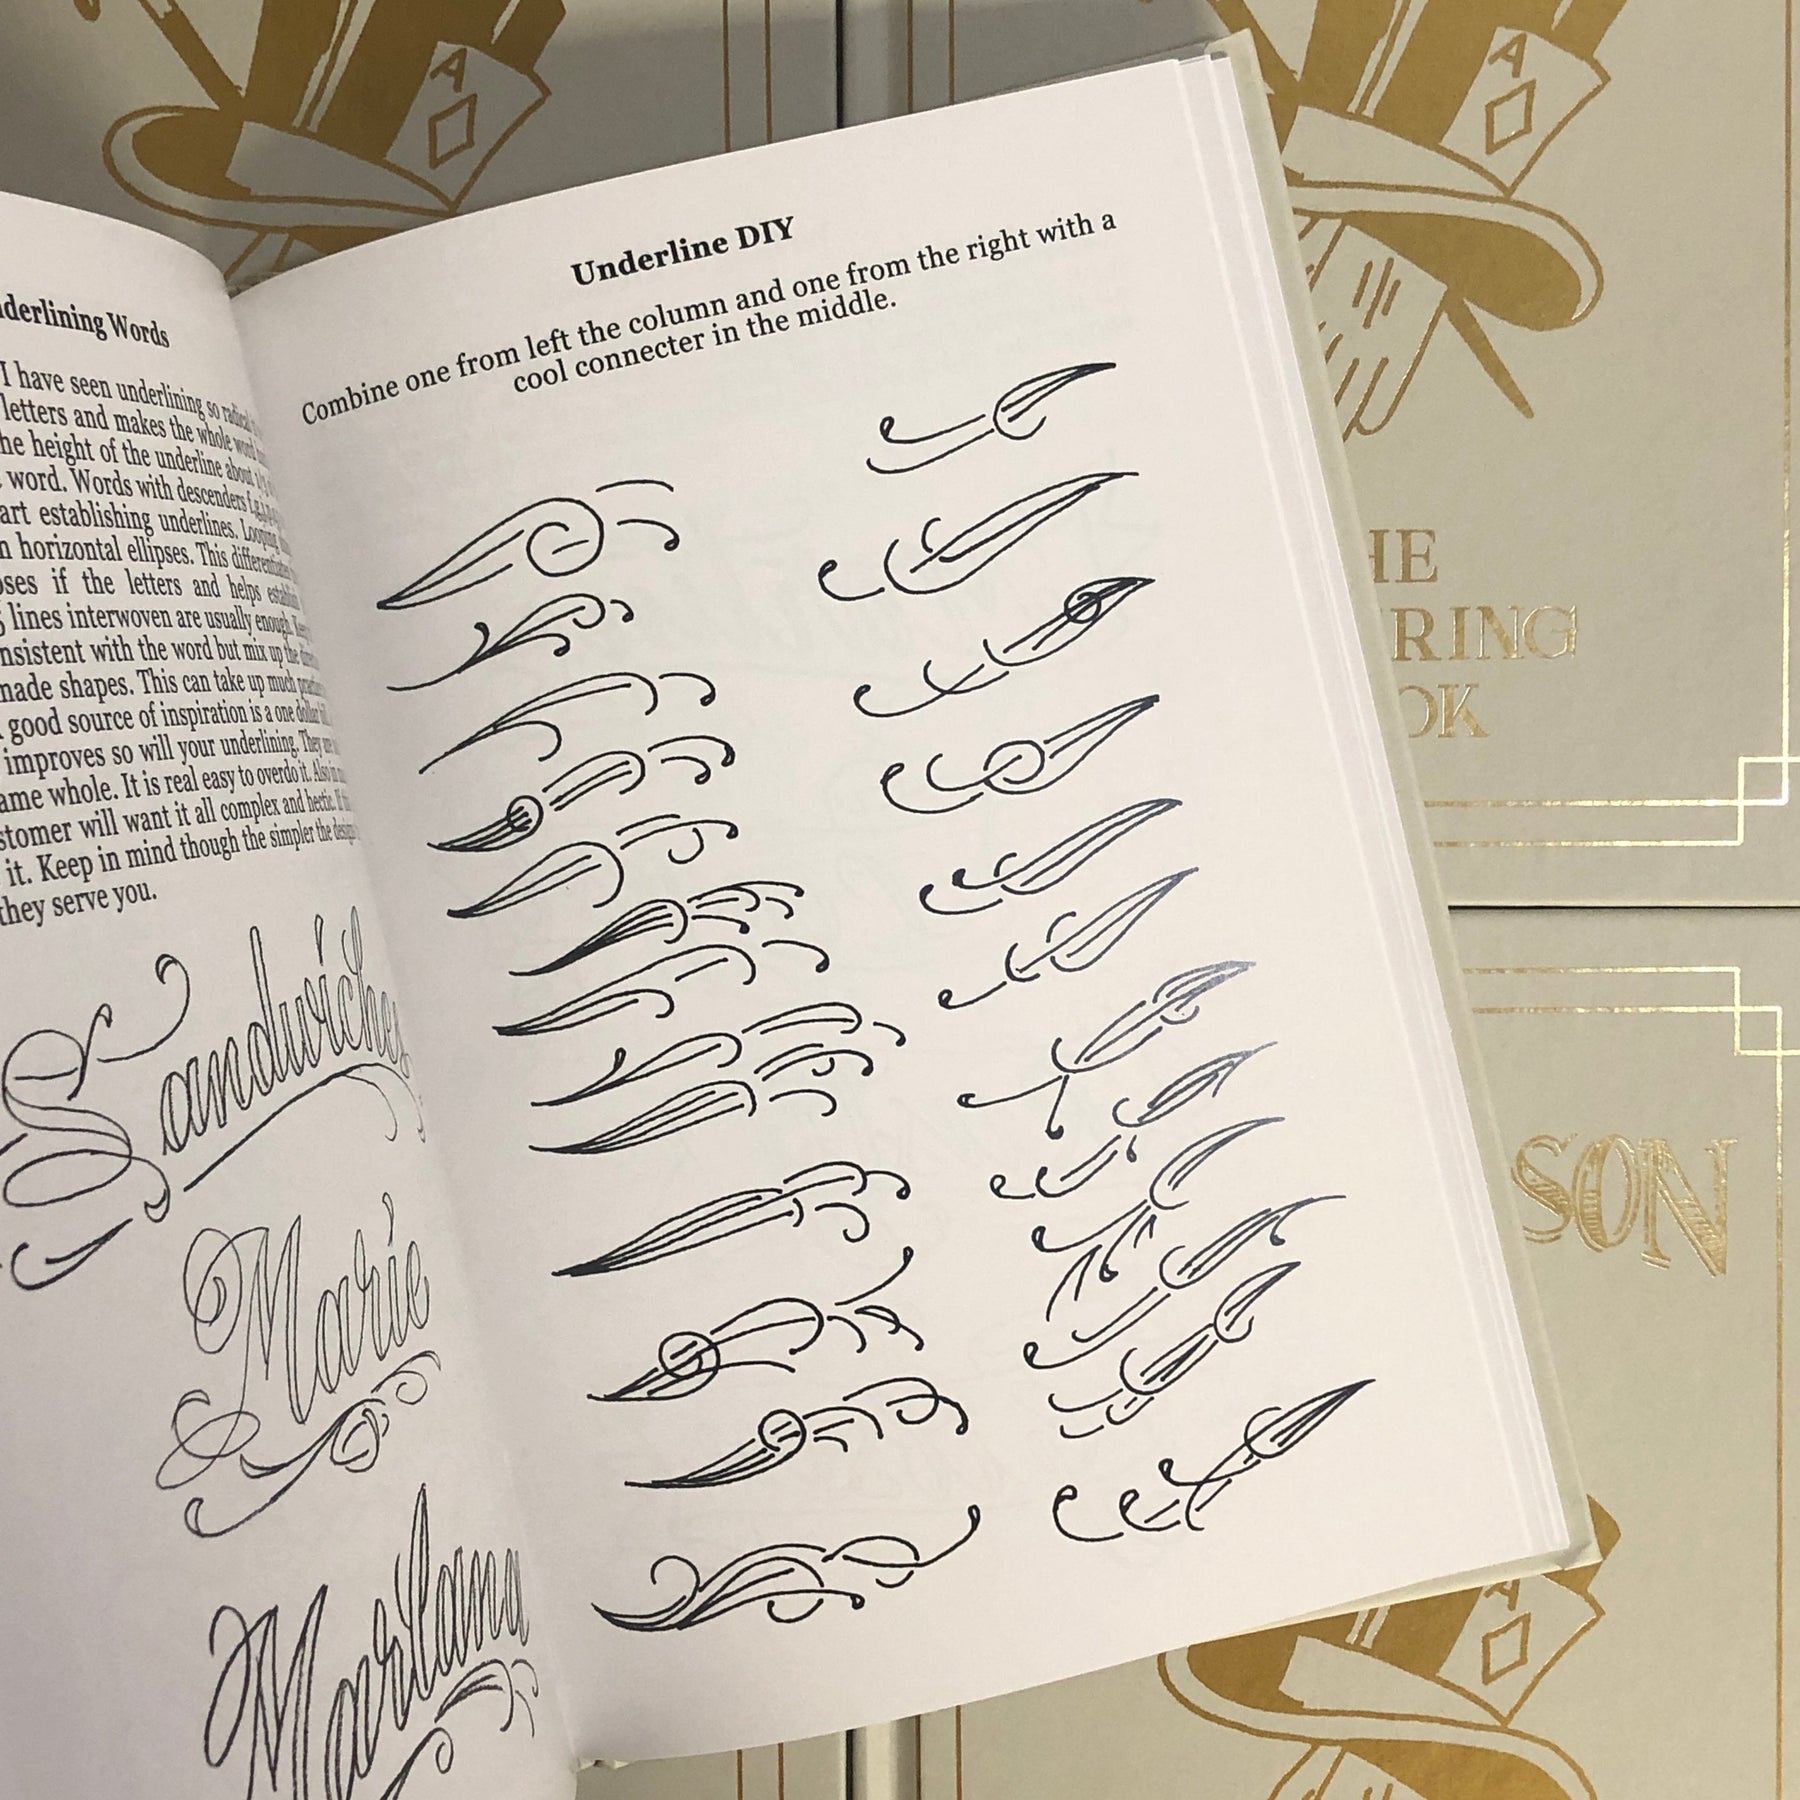 Dave Gibson - The Lettering Book – BELZEL BOOKS